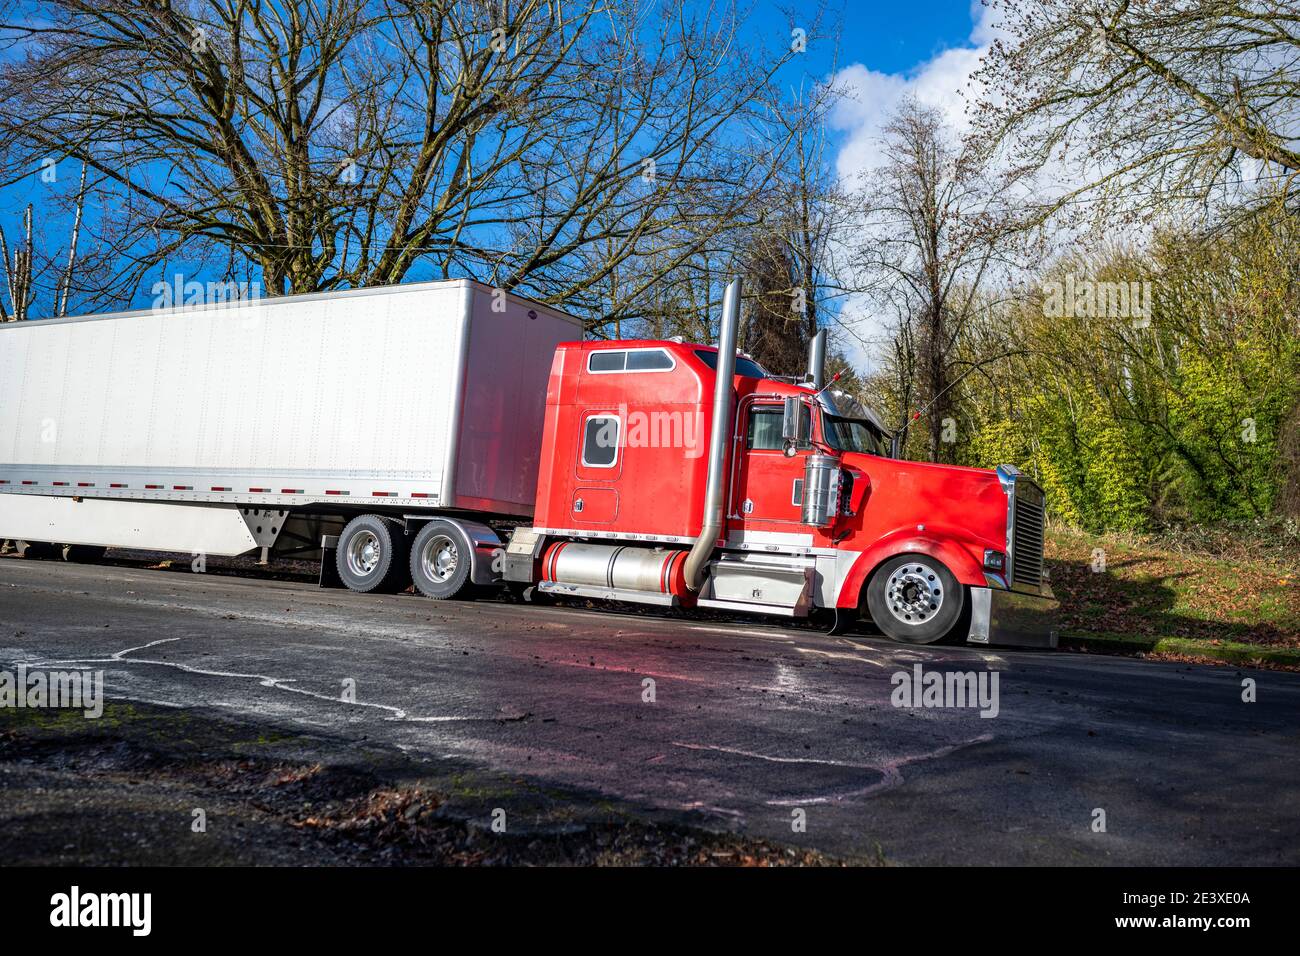 https://c8.alamy.com/comp/2E3XE0A/bright-red-american-idol-classic-big-rig-semi-truck-tractor-with-chrome-accessories-and-vertical-exhaust-pipes-and-dry-van-semi-trailer-standing-on-th-2E3XE0A.jpg